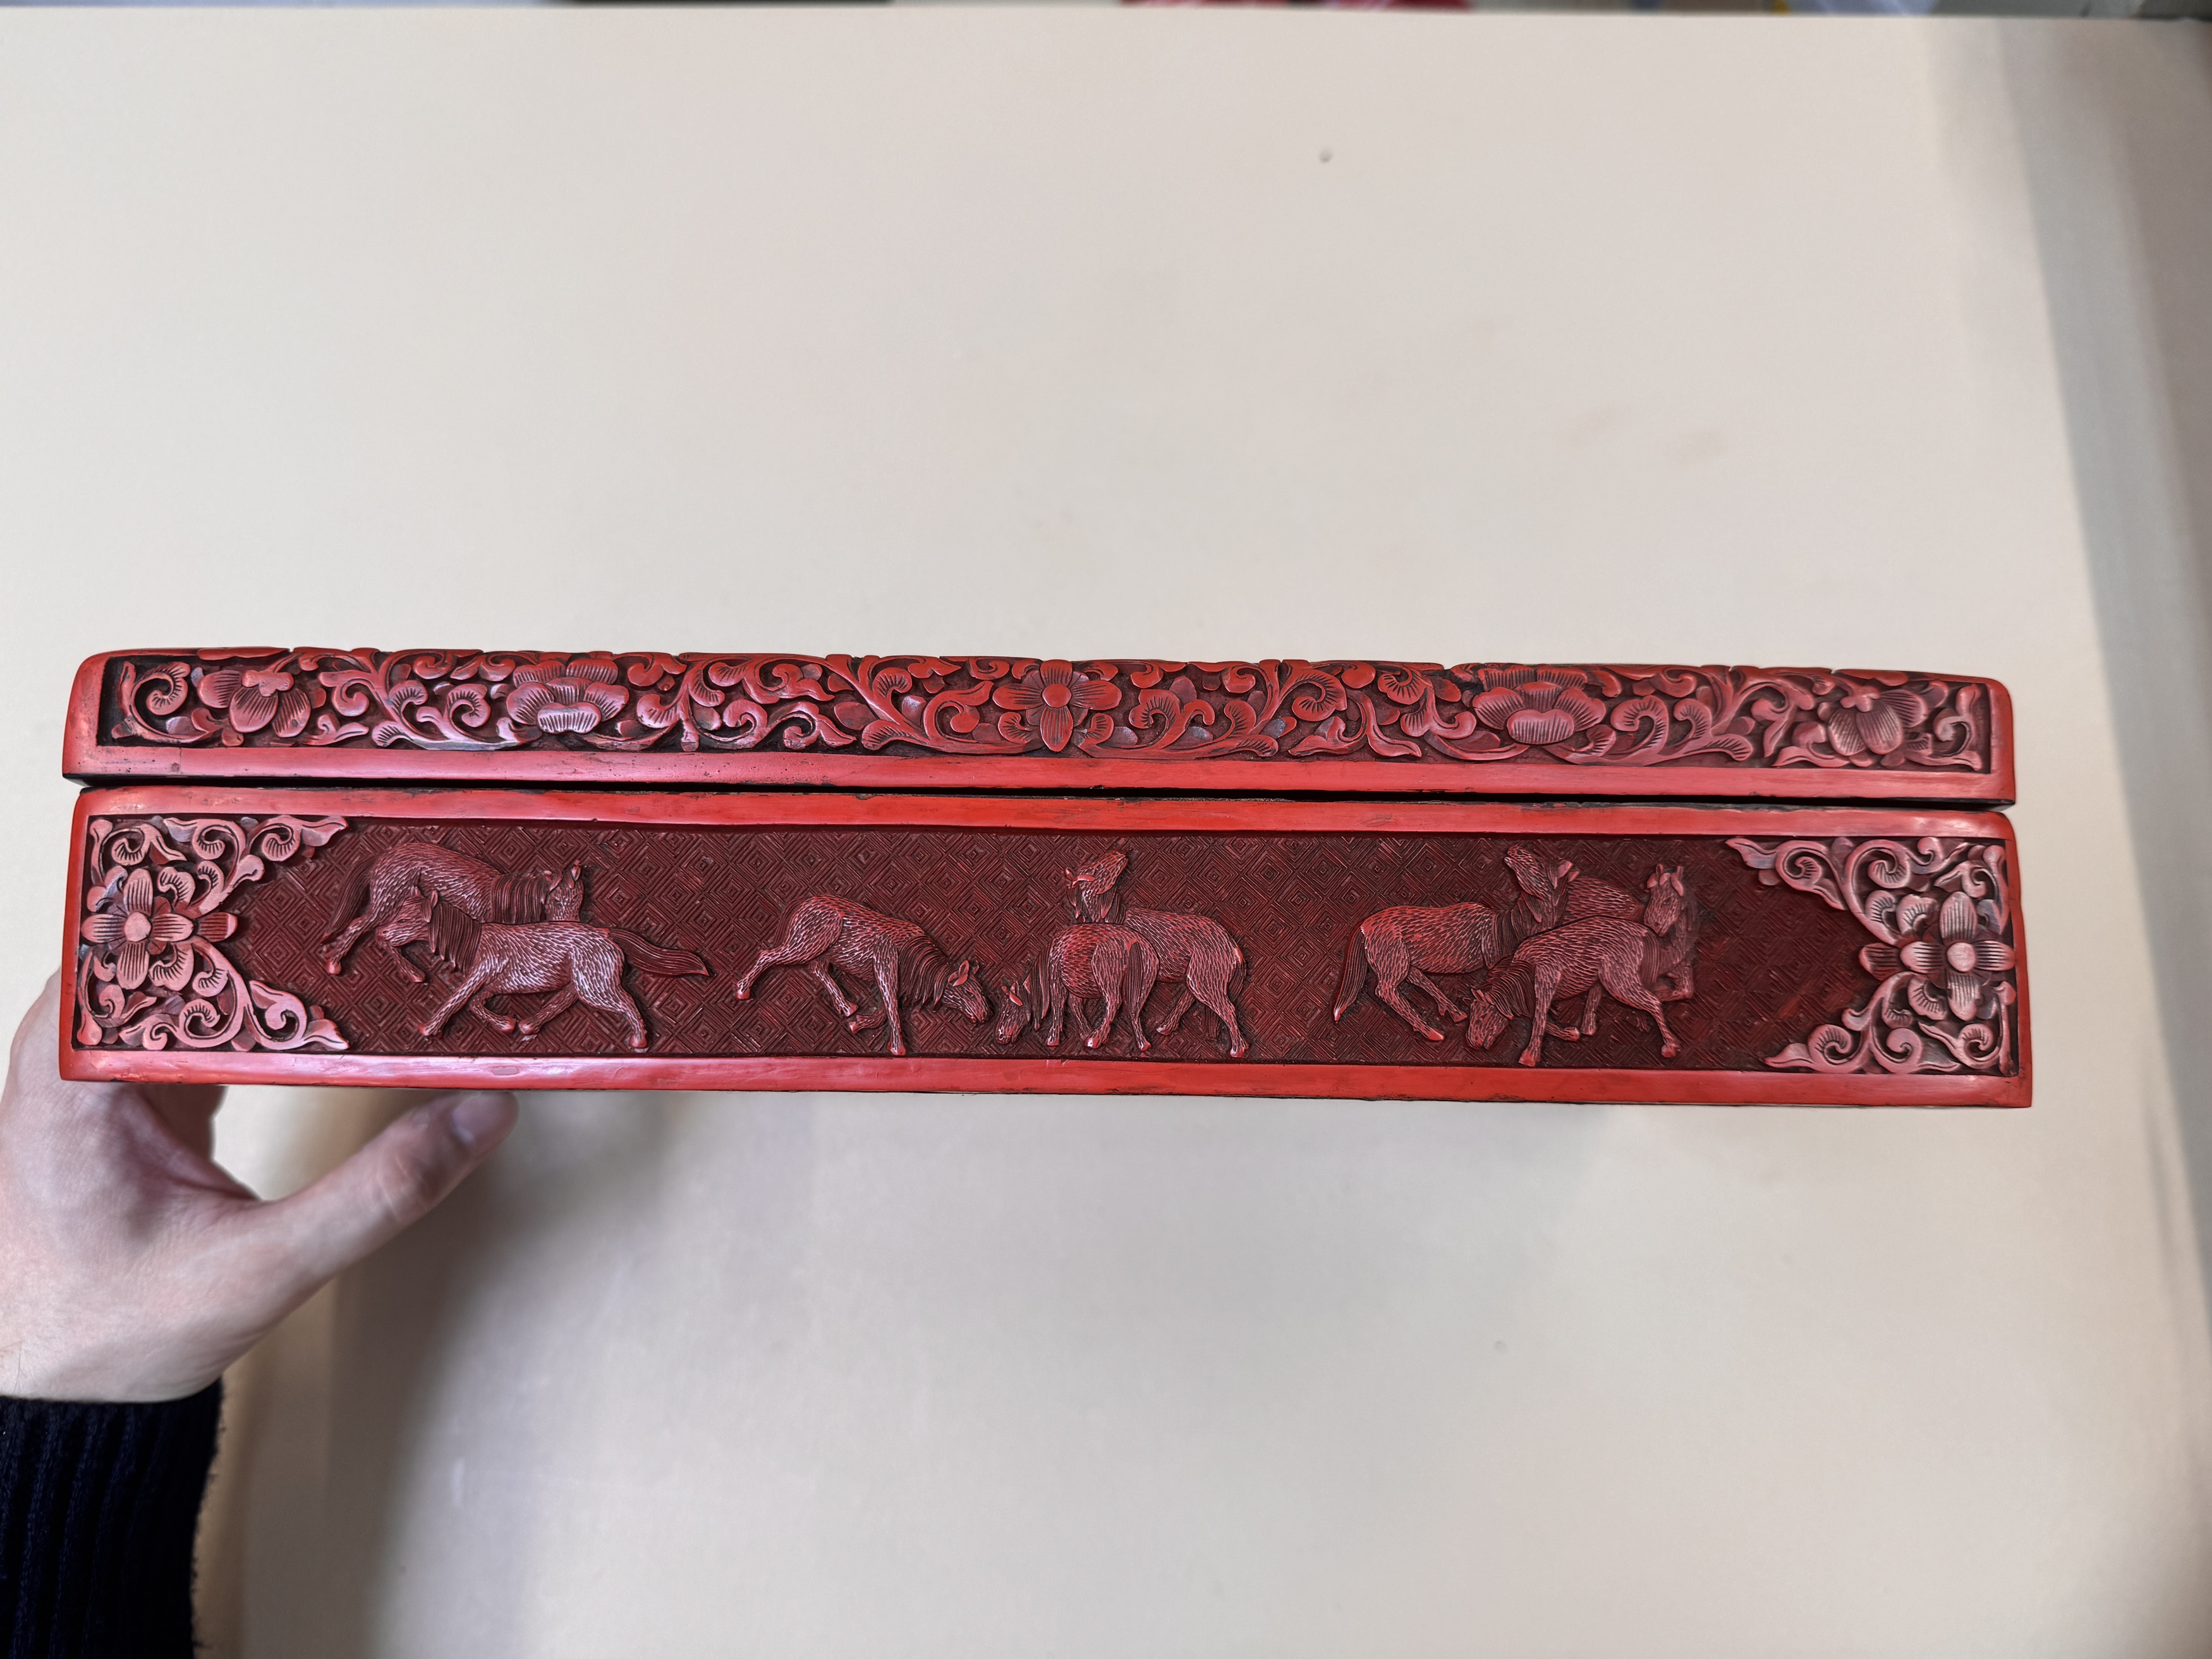 A LARGE AND FINE CHINESE CINNABAR LACQUER 'FIGURAL' BOX AND COVER 早十九世紀 剔紅人物故事圖紋方蓋盒 - Image 43 of 54